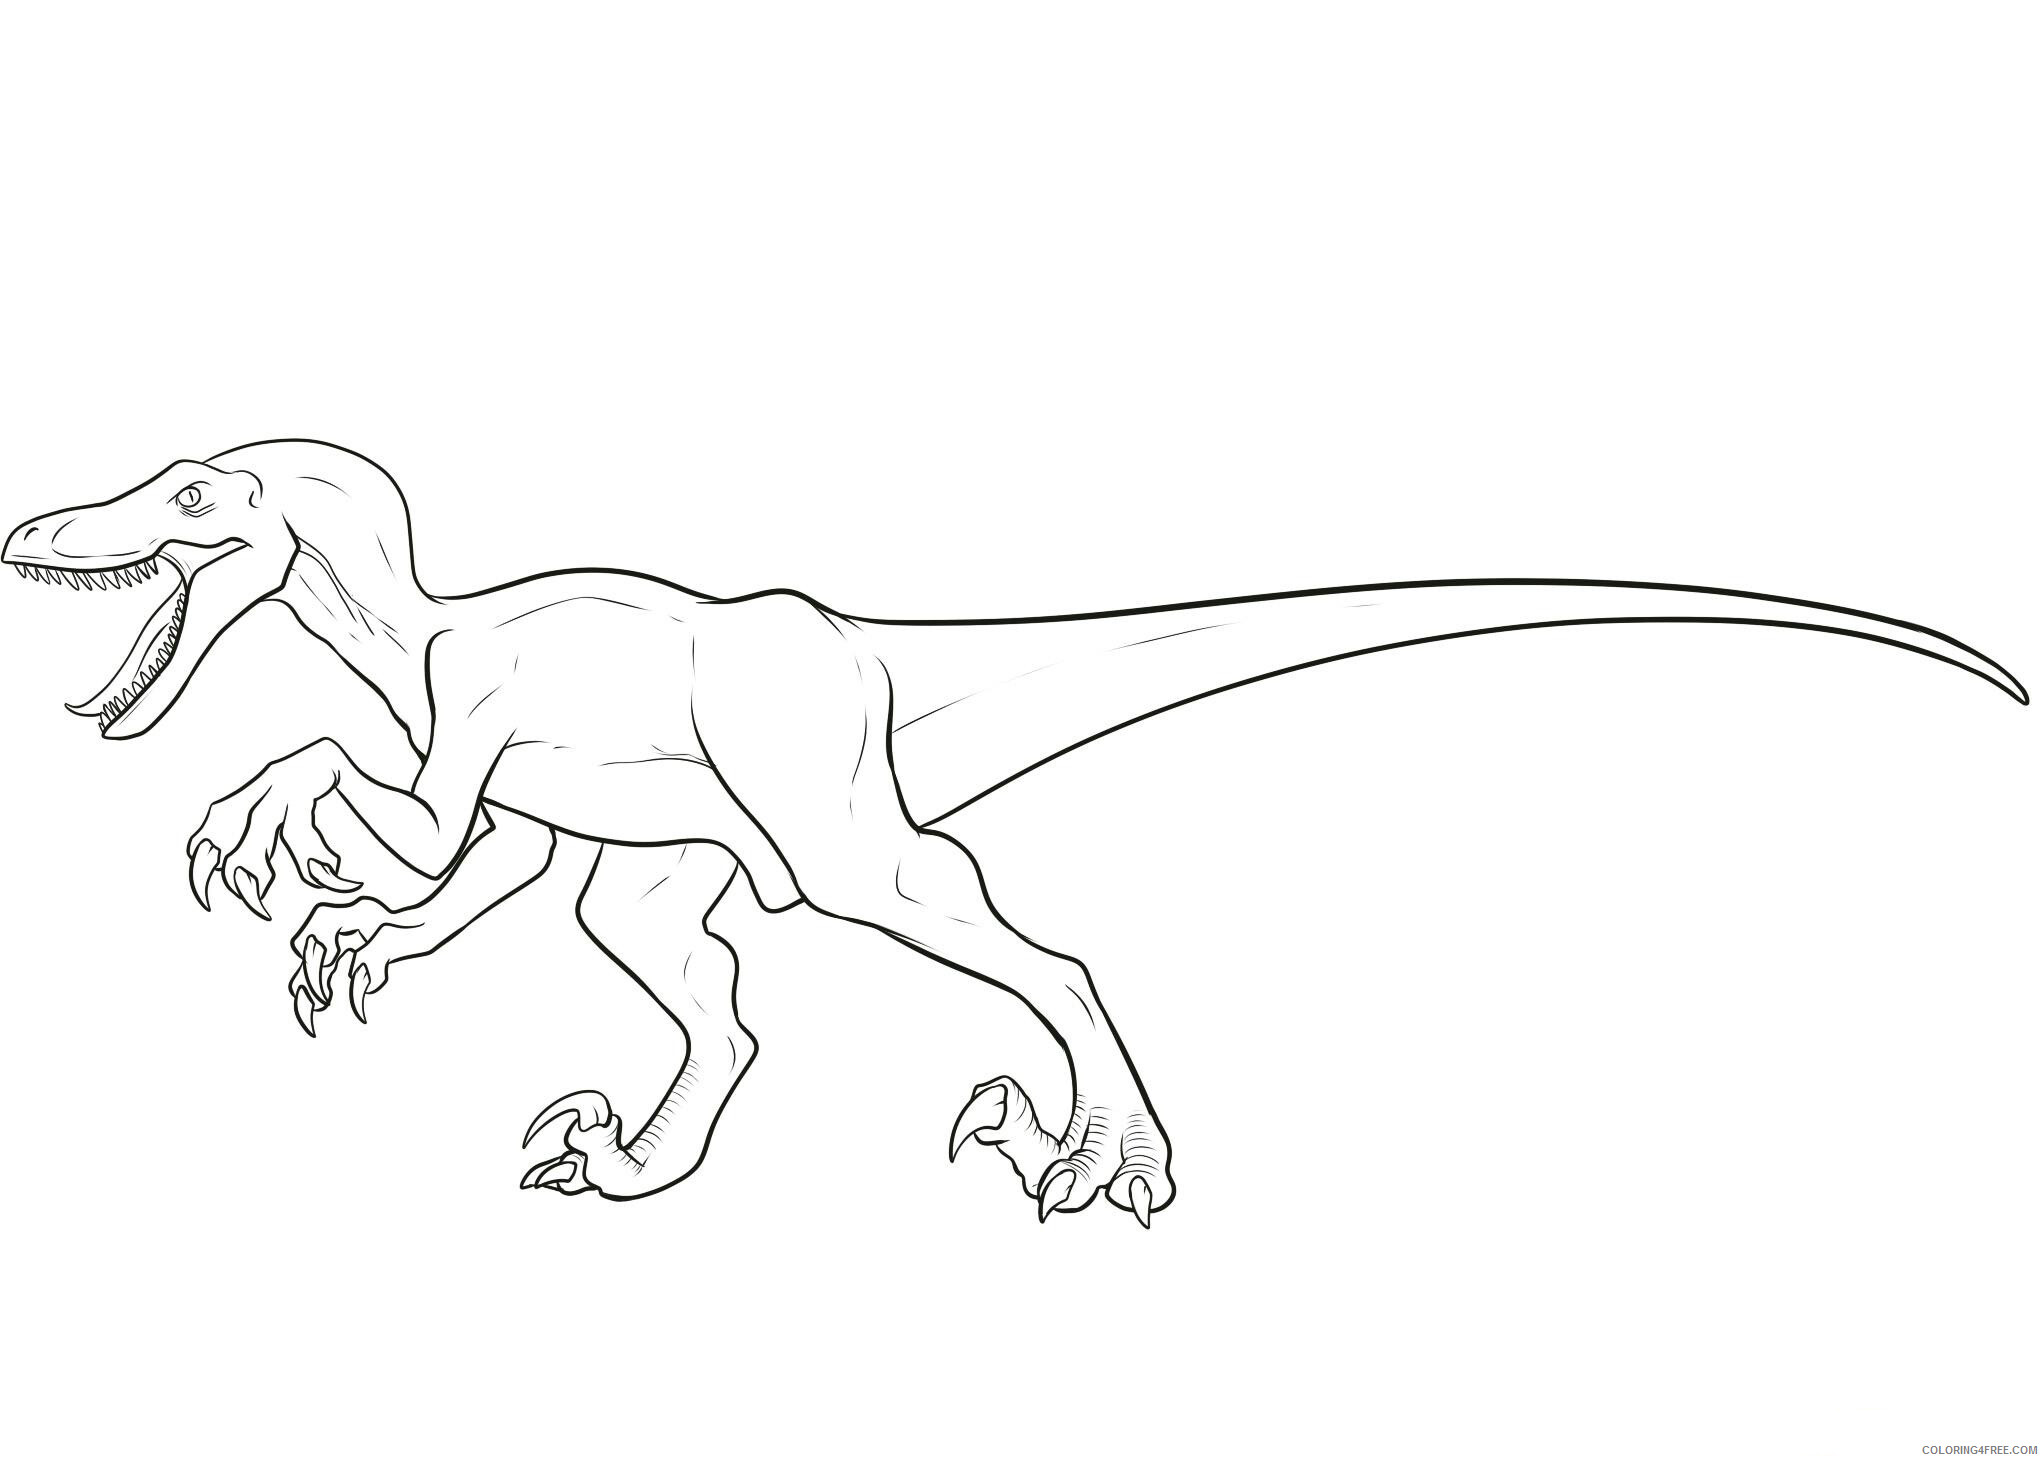 Jurassic World Coloring Pages for boys Jurassic World Dino Printable 2020 0526 Coloring4free